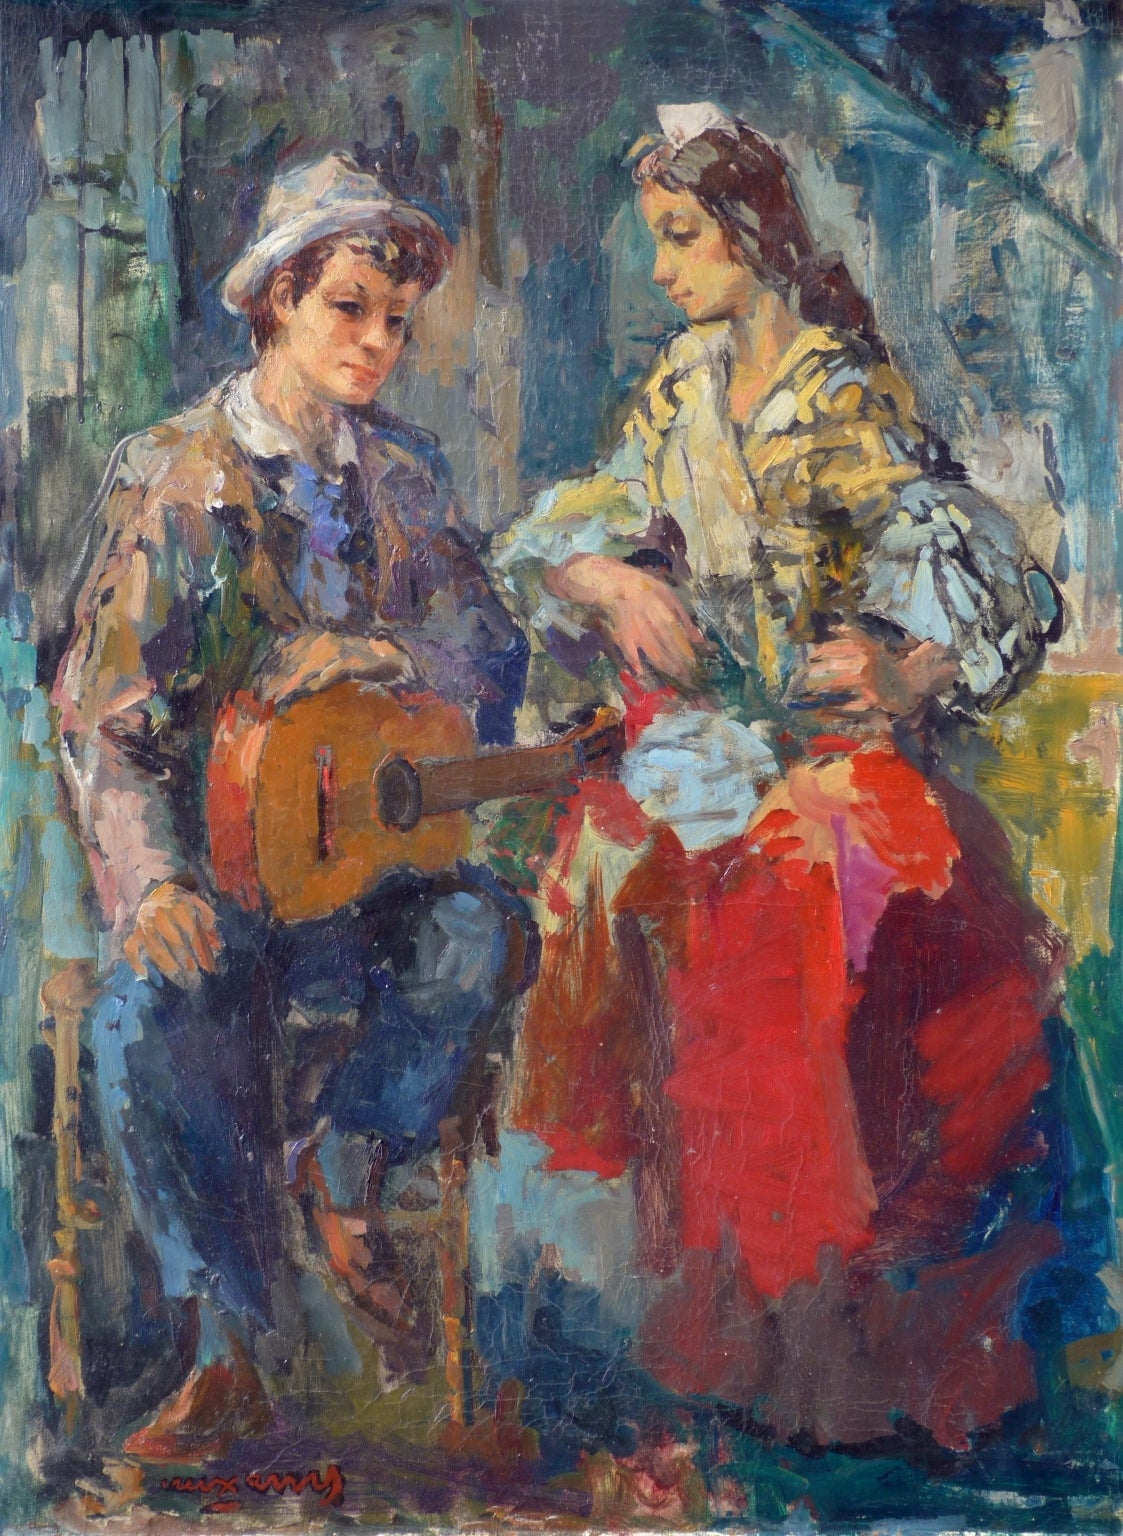 Pedro CREIXAMS Figurative Painting - Gypsy and Guitarist - Remblas in Barcelona